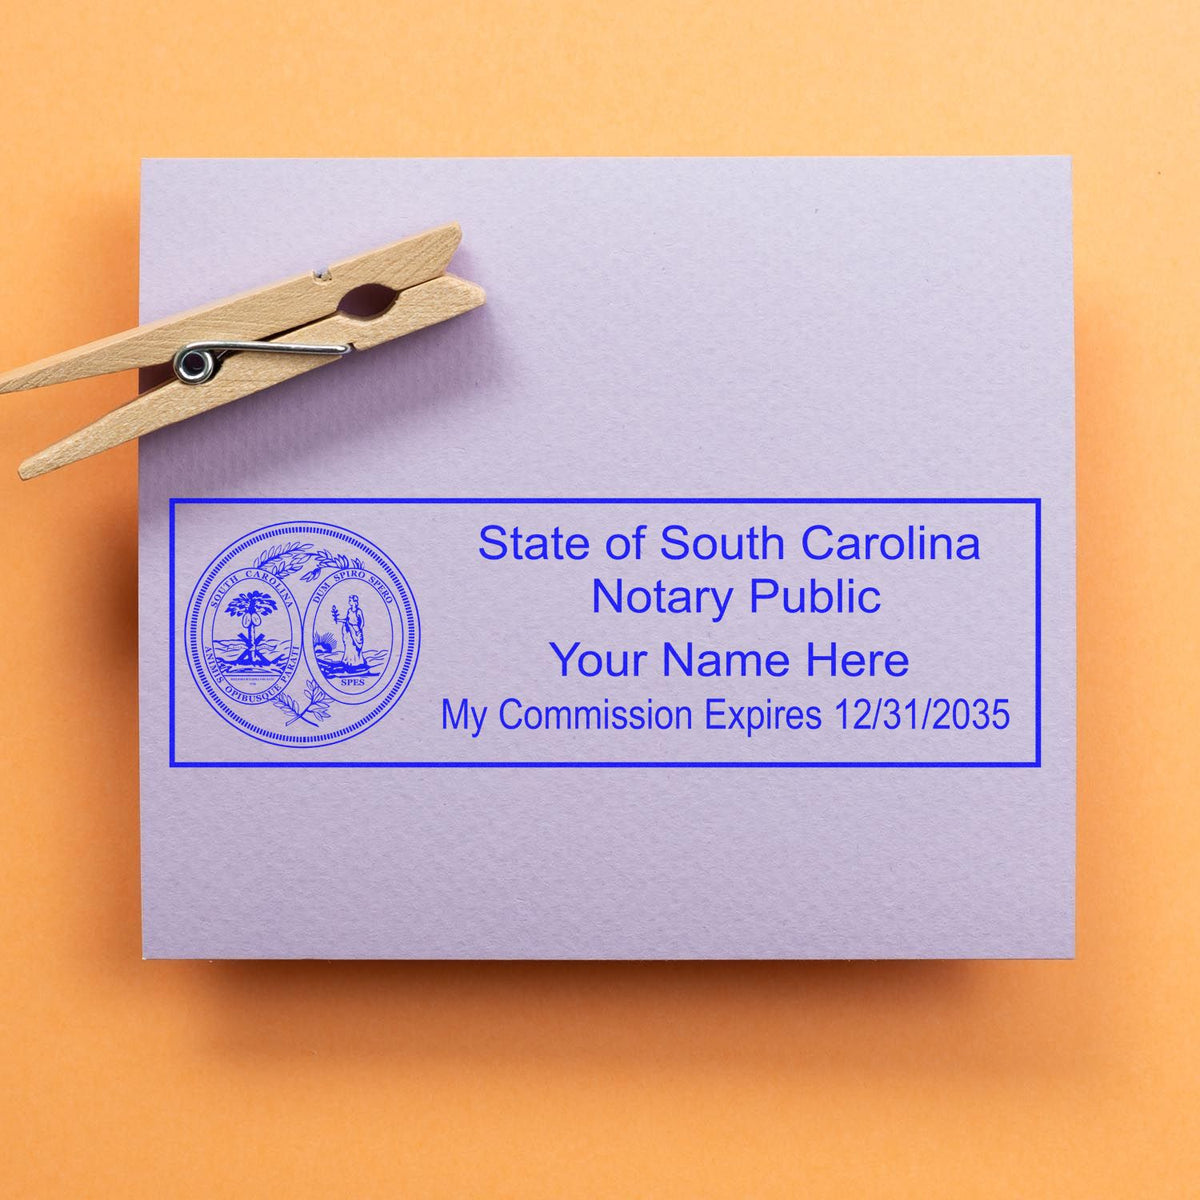 A stamped impression of the Super Slim South Carolina Notary Public Stamp in this stylish lifestyle photo, setting the tone for a unique and personalized product.